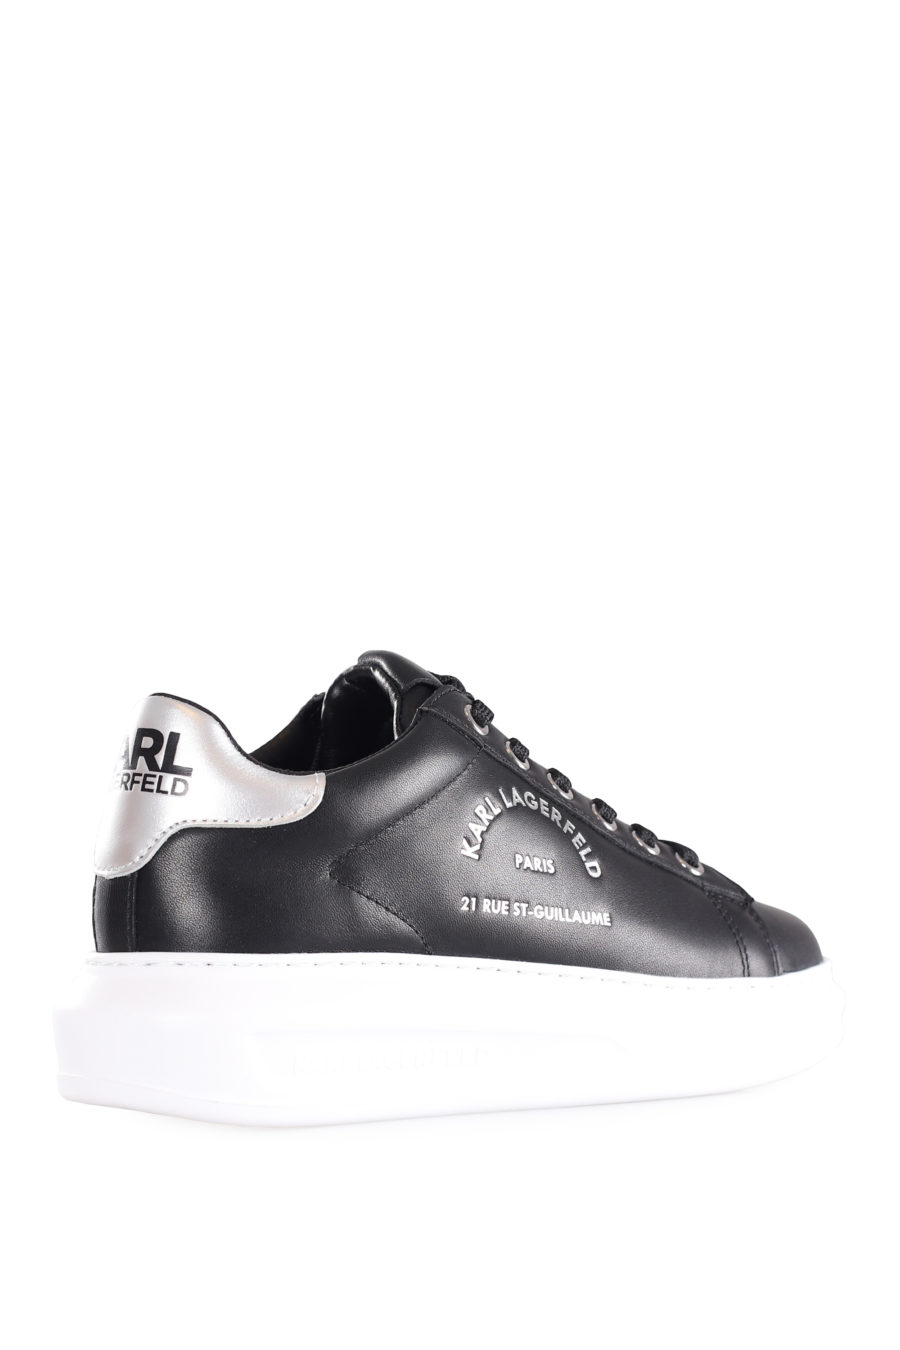 Black trainers with silver logo and platform - IMG 9567